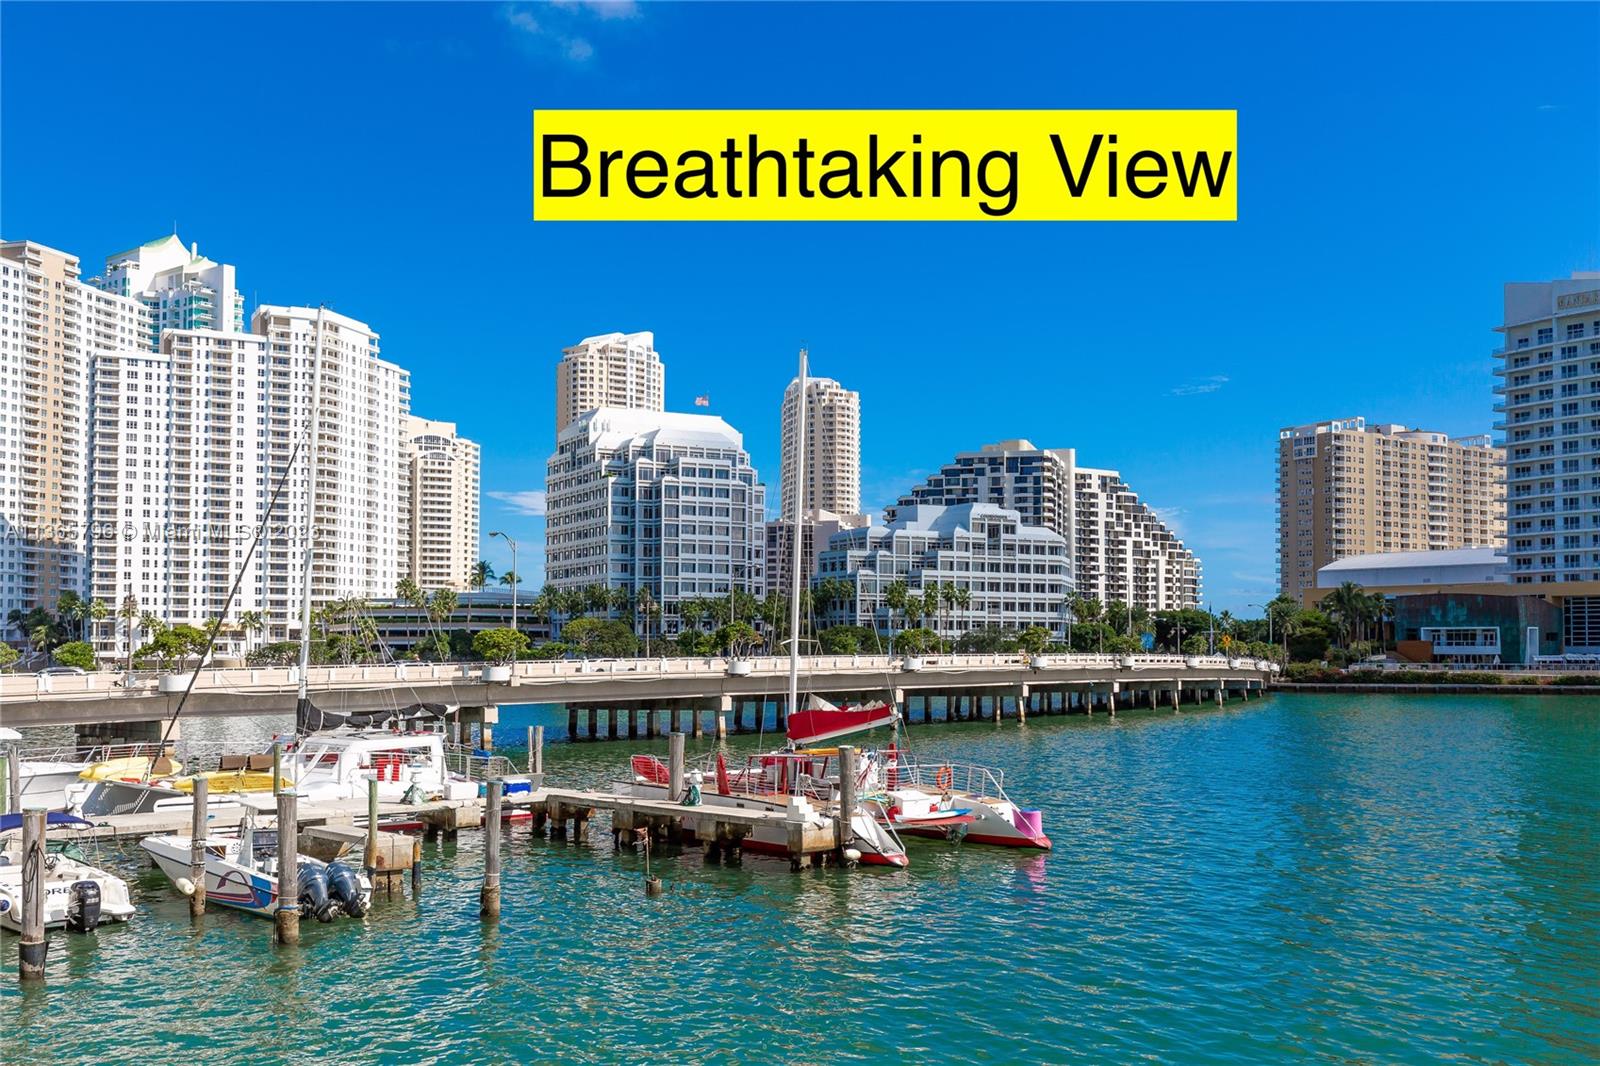 Lovely Penthouse in the hearth of Brickell.Enjoy the breathtaking view. Location, Location.Living in the middle of Brickell next to the restaurants/lounge. Walking distance next to Brickell City Centre Mall. Close to Mary City,American Airline, Key Biscayne and Miami Beach area.